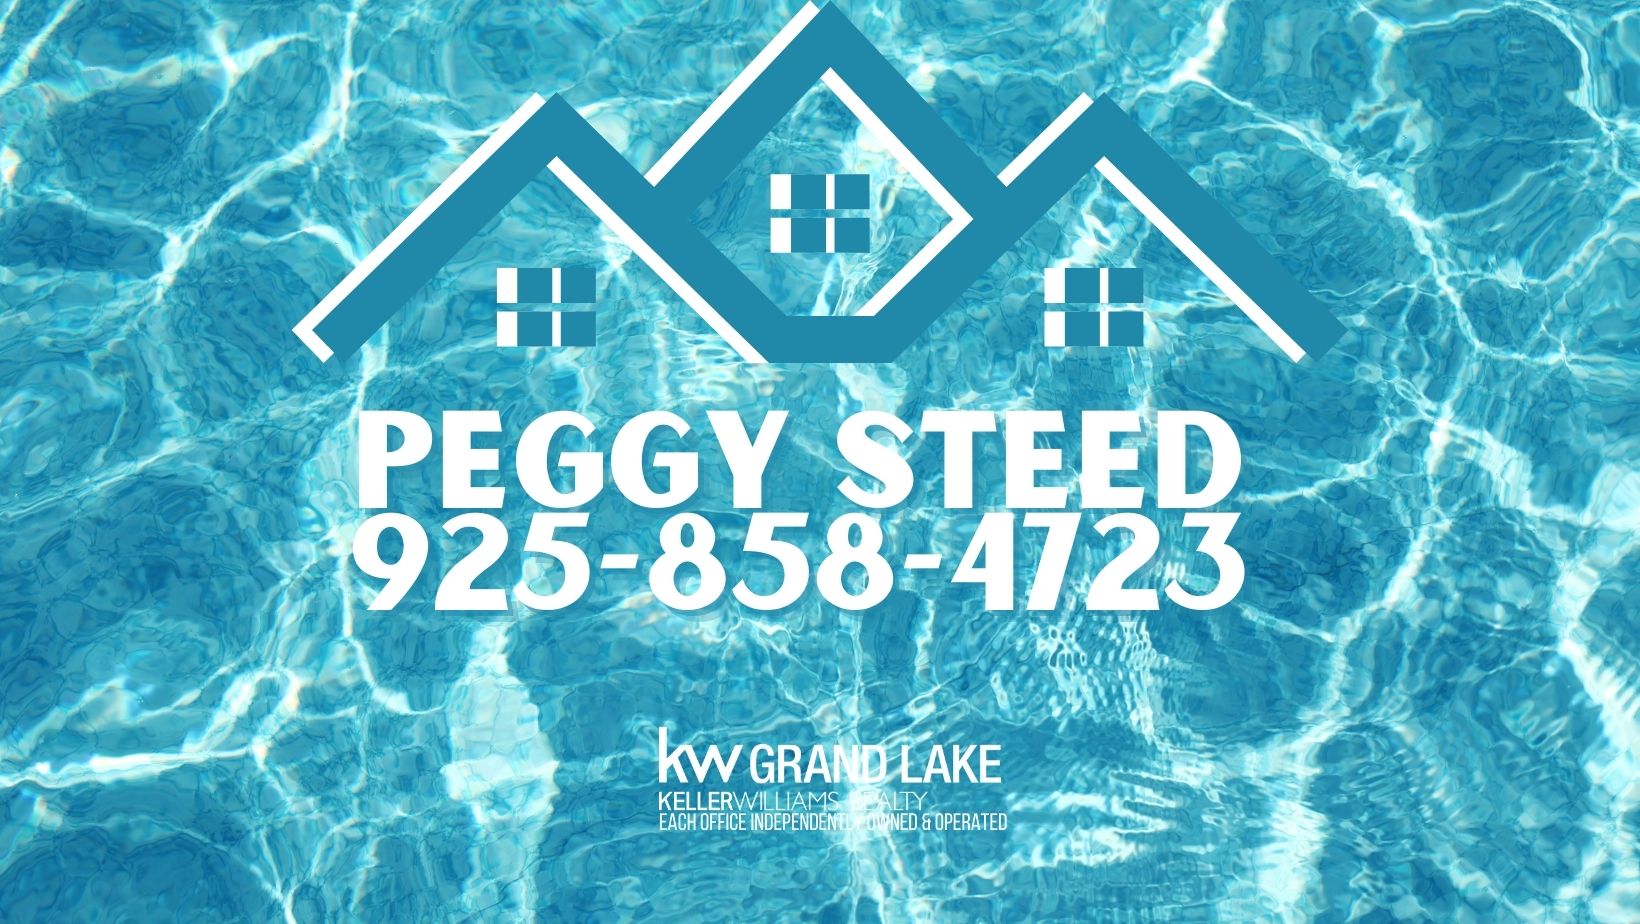 Peggy Keefer-Steed - Keller Williams Realty - Grand Lake